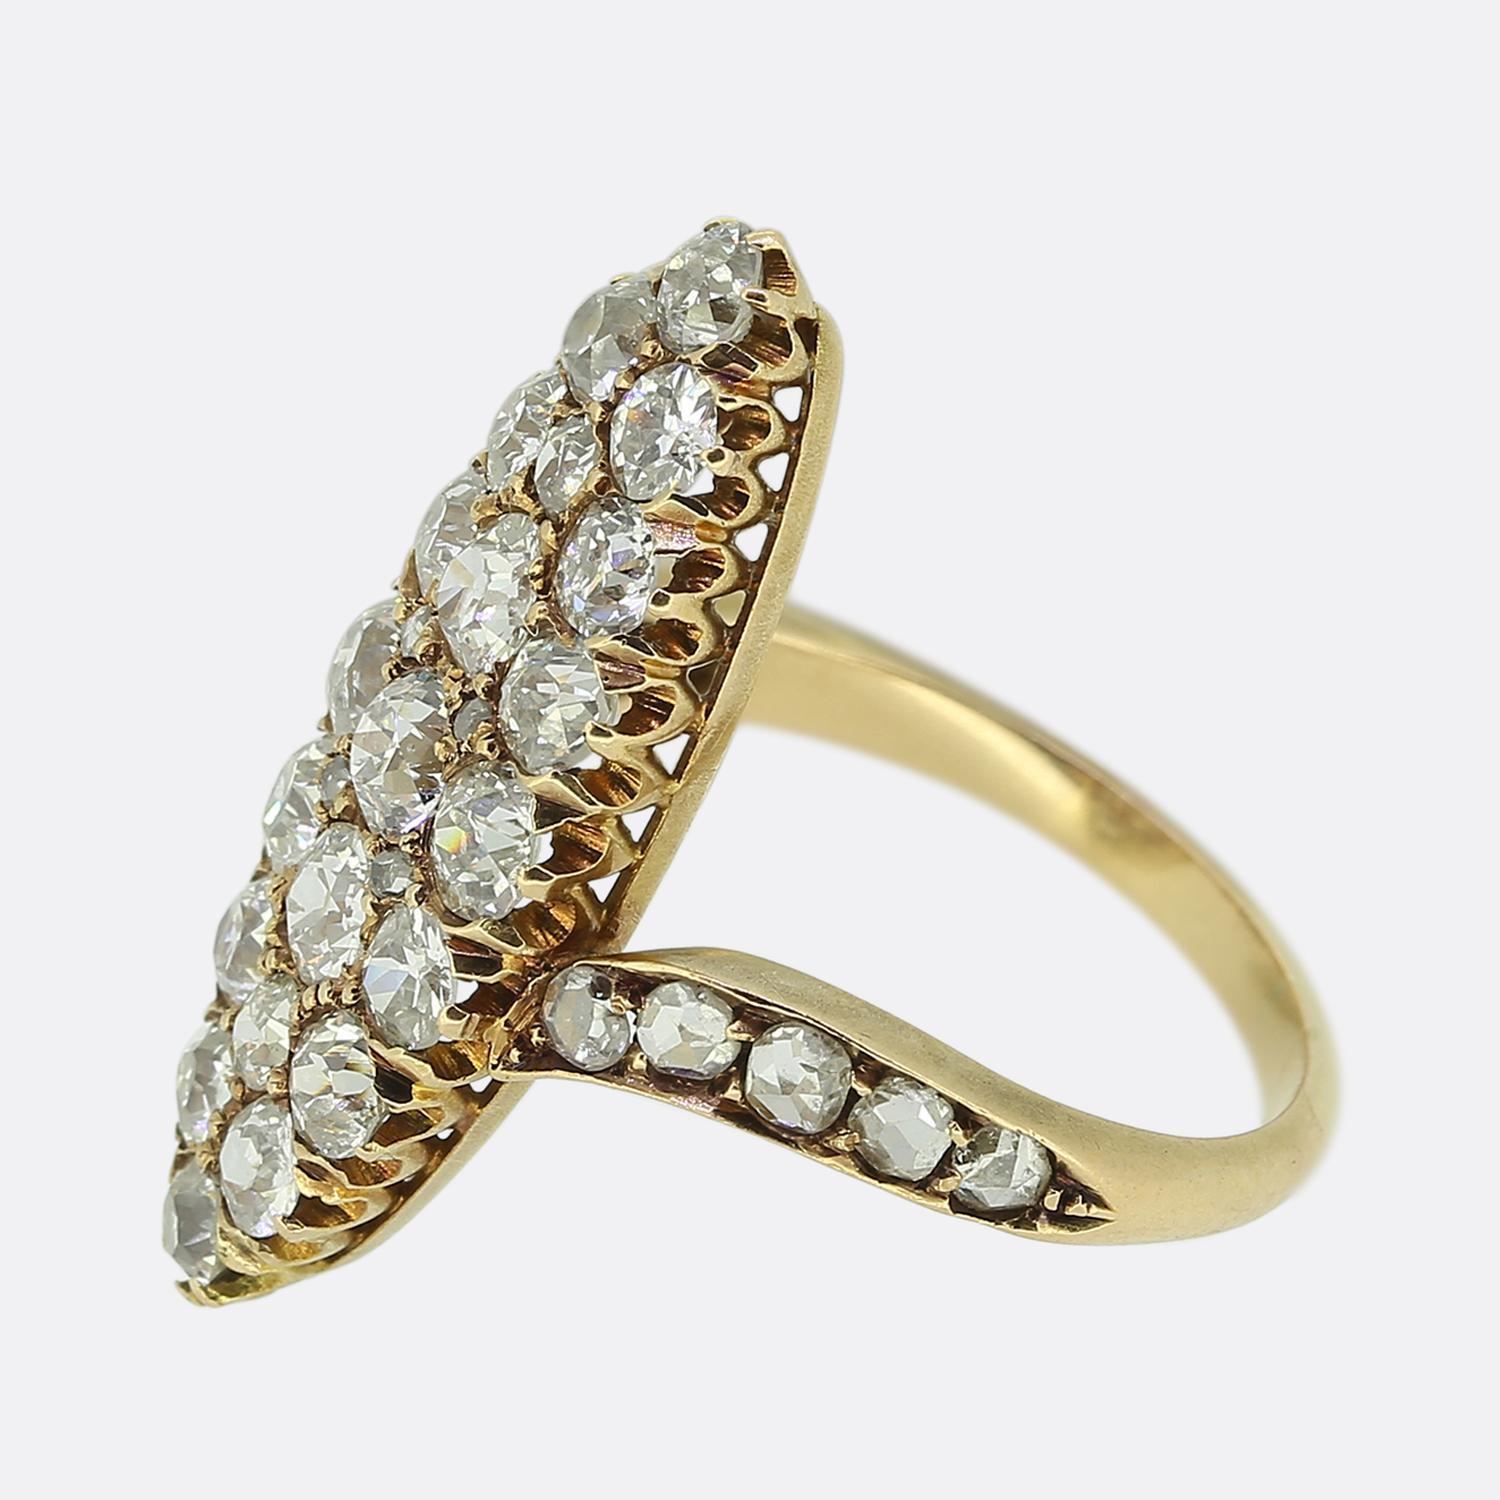 Here we have an outstanding diamond cobblestone ring originally dating back to the Victorian period. The face of this antique piece has been crafted from yellow gold into a boat-like shape which plays host to a vast array of bright white chunky old